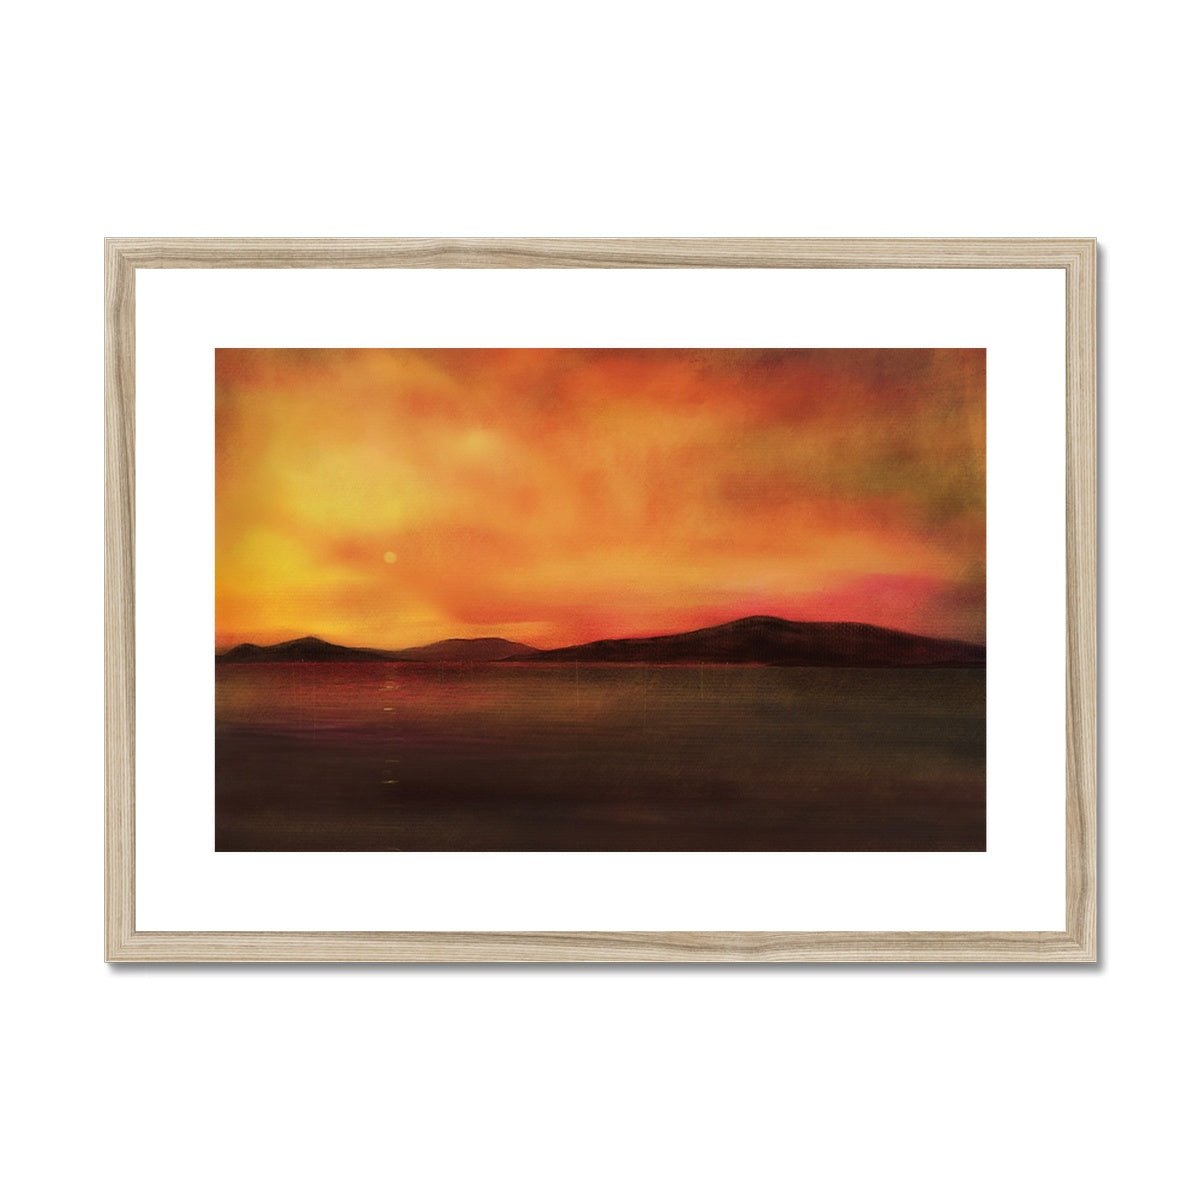 Isle Of Harris Sunset Painting | Framed & Mounted Prints From Scotland-Framed & Mounted Prints-Hebridean Islands Art Gallery-A2 Landscape-Natural Frame-Paintings, Prints, Homeware, Art Gifts From Scotland By Scottish Artist Kevin Hunter